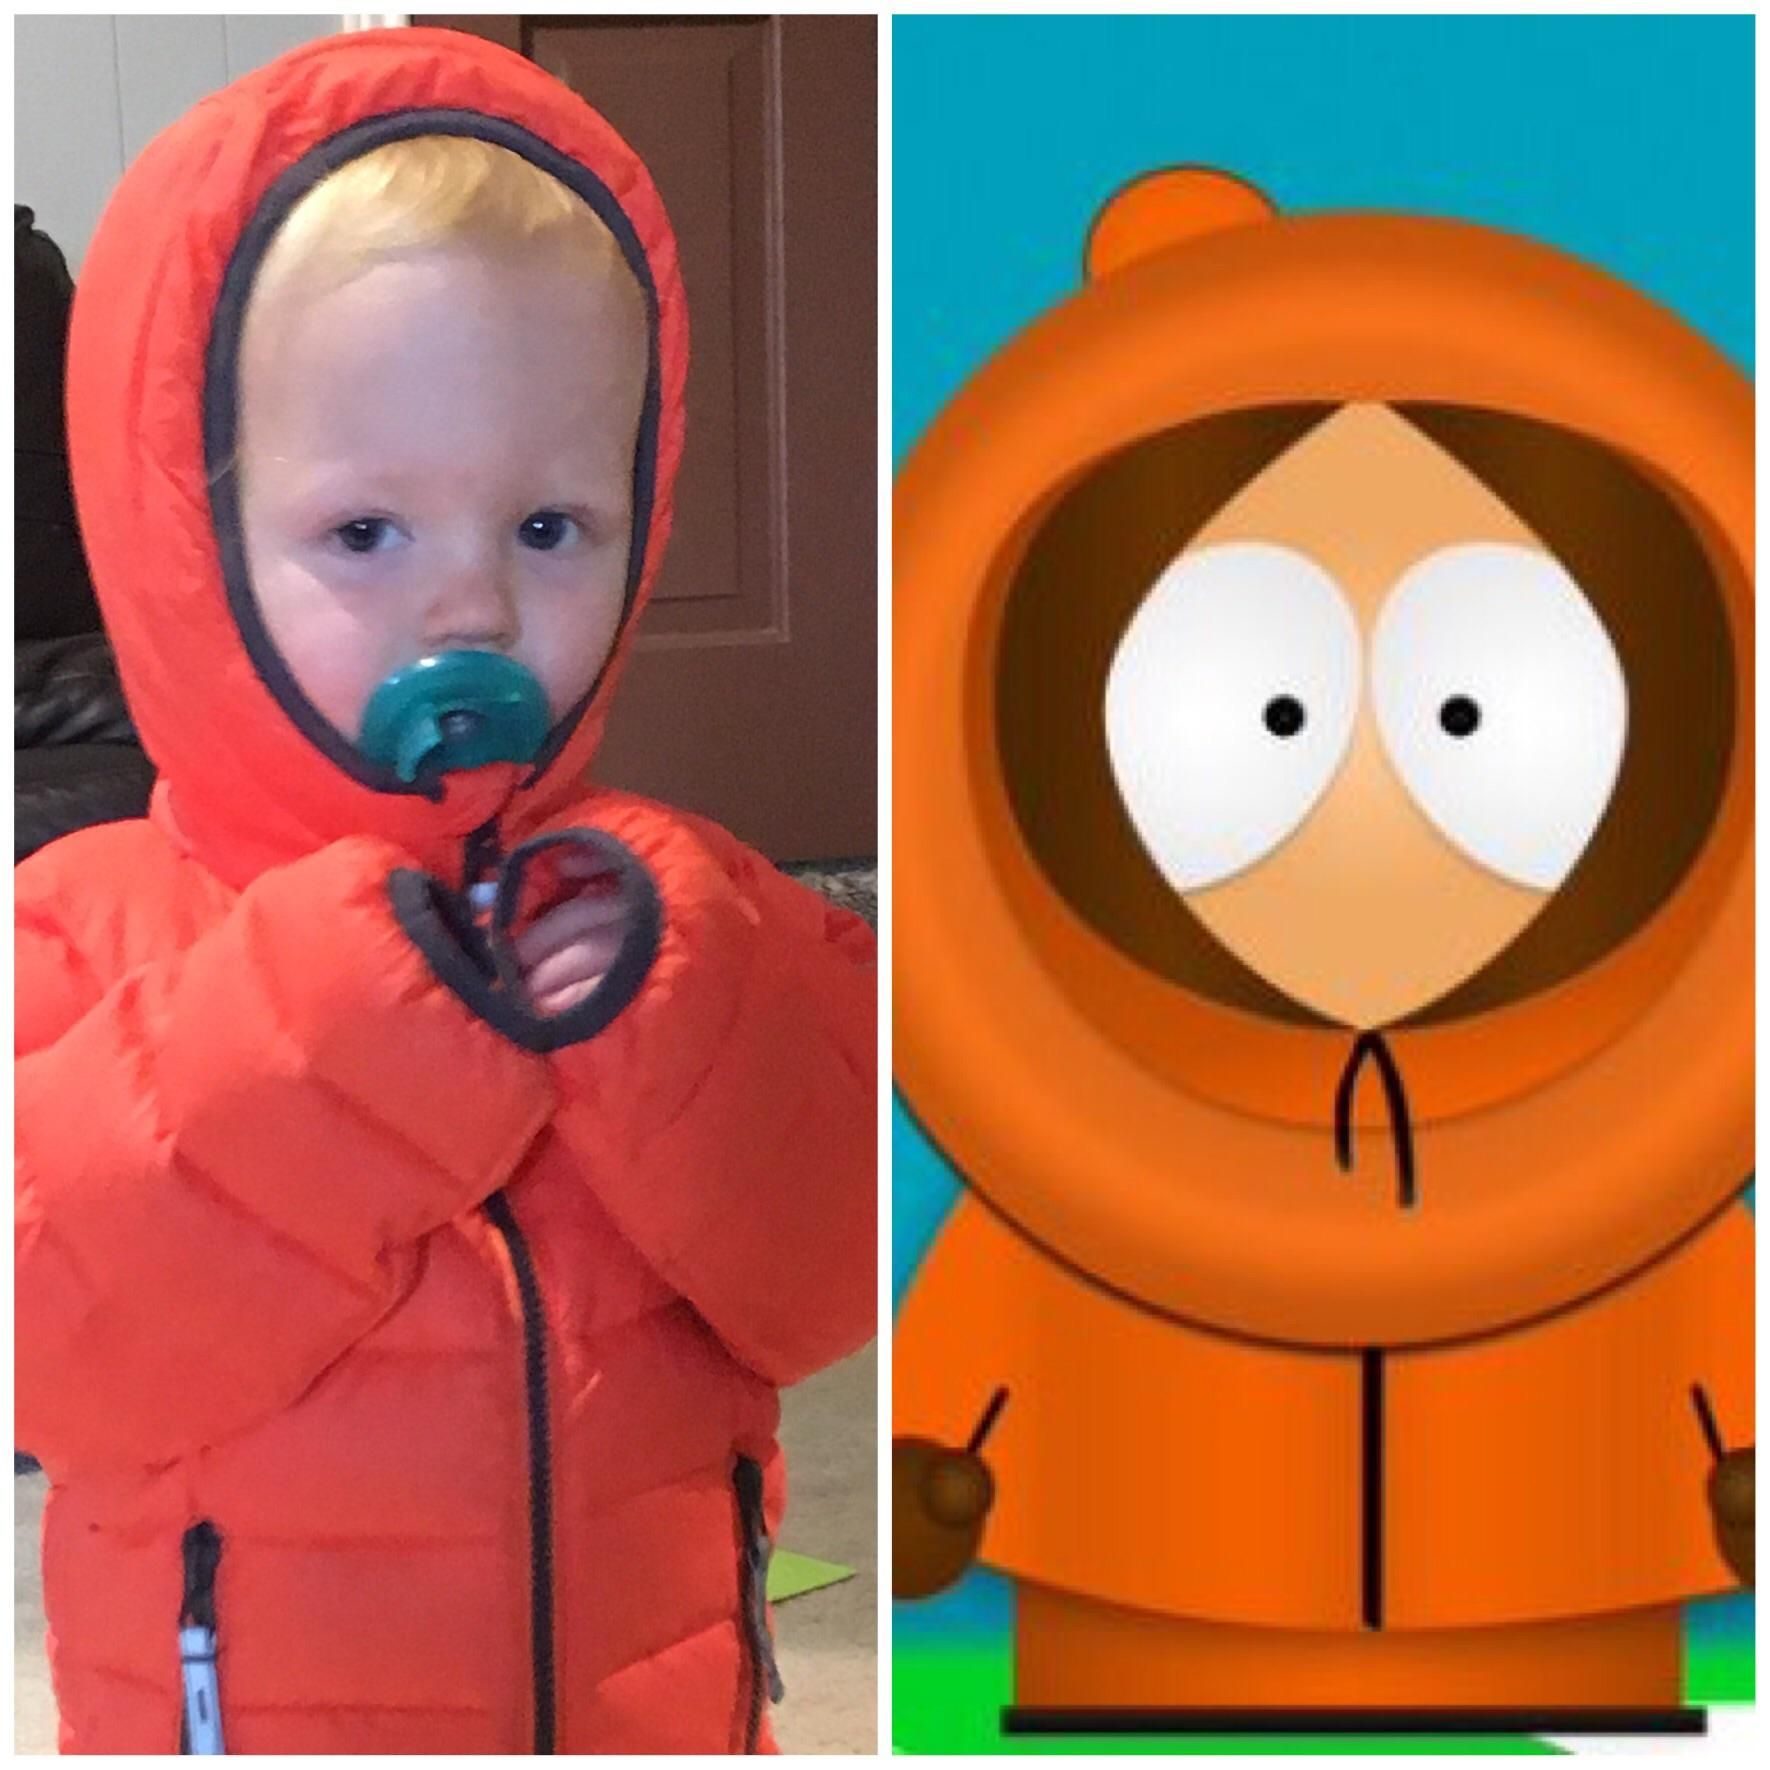 My wife thinks buying my son an orange coat may not have been a good idea...